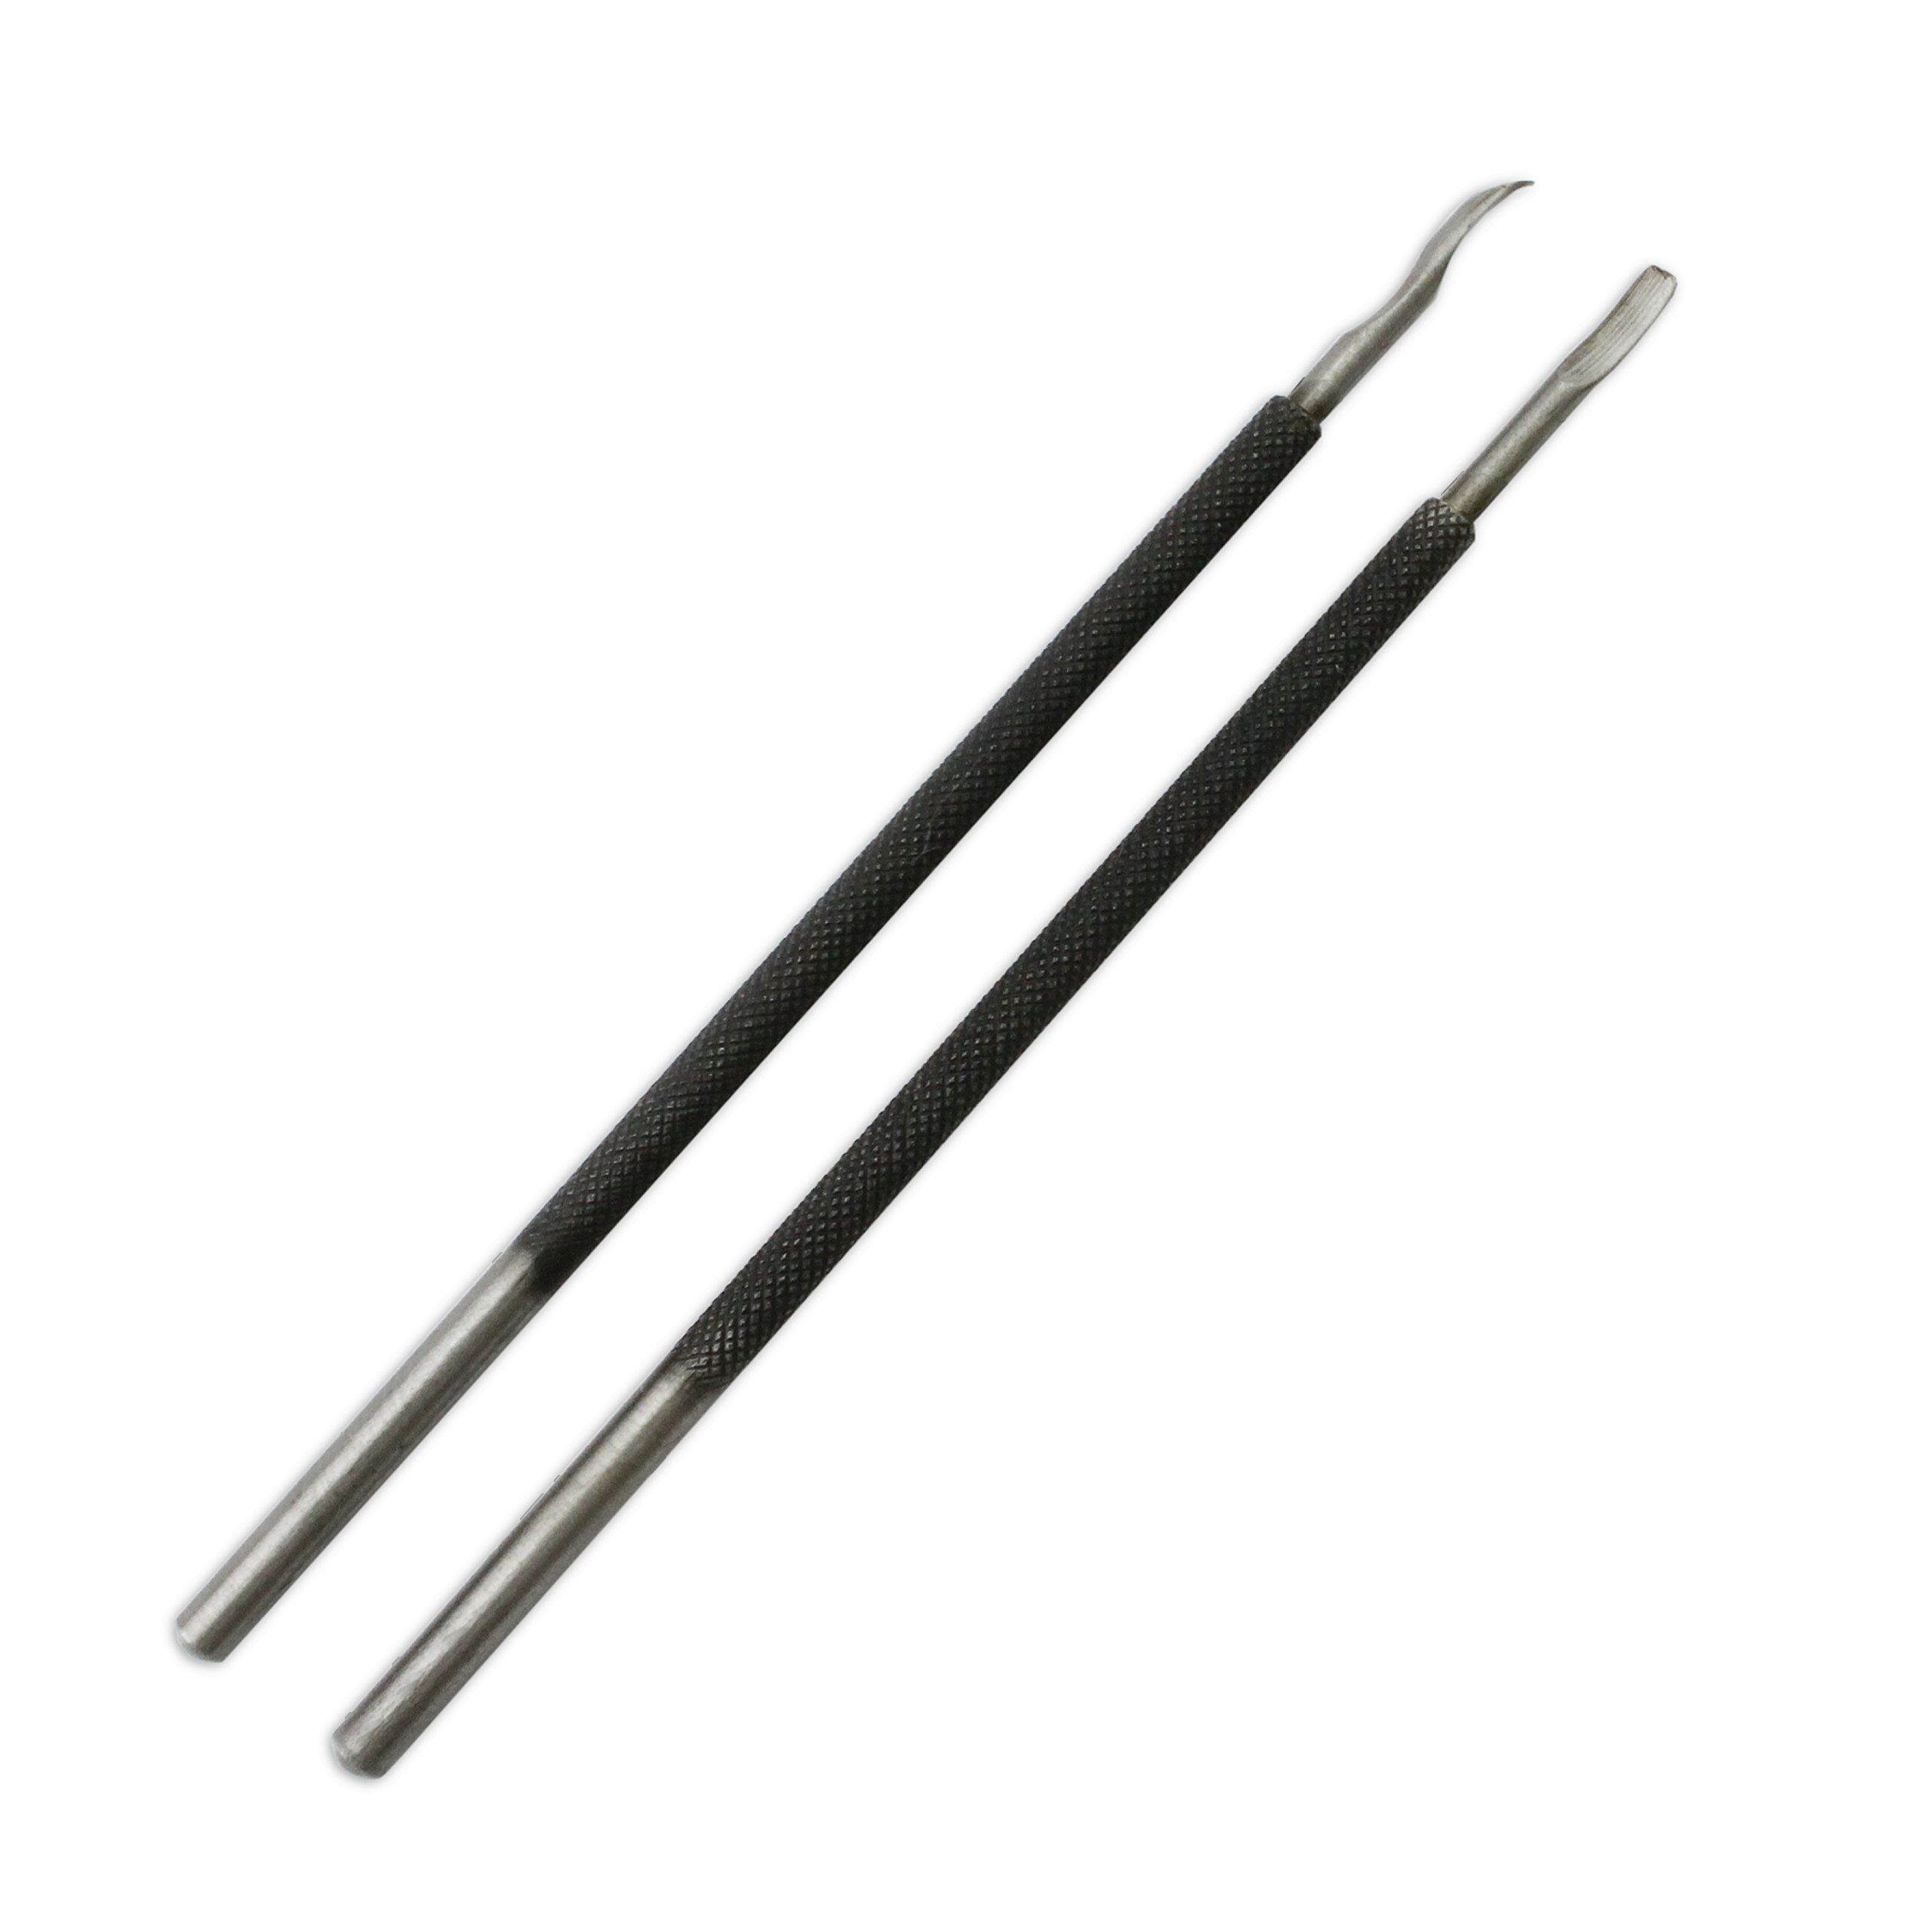 Watchmakers Lever (Set of 2) : Type Watch Hands Removers Replace Tool Repair (25)